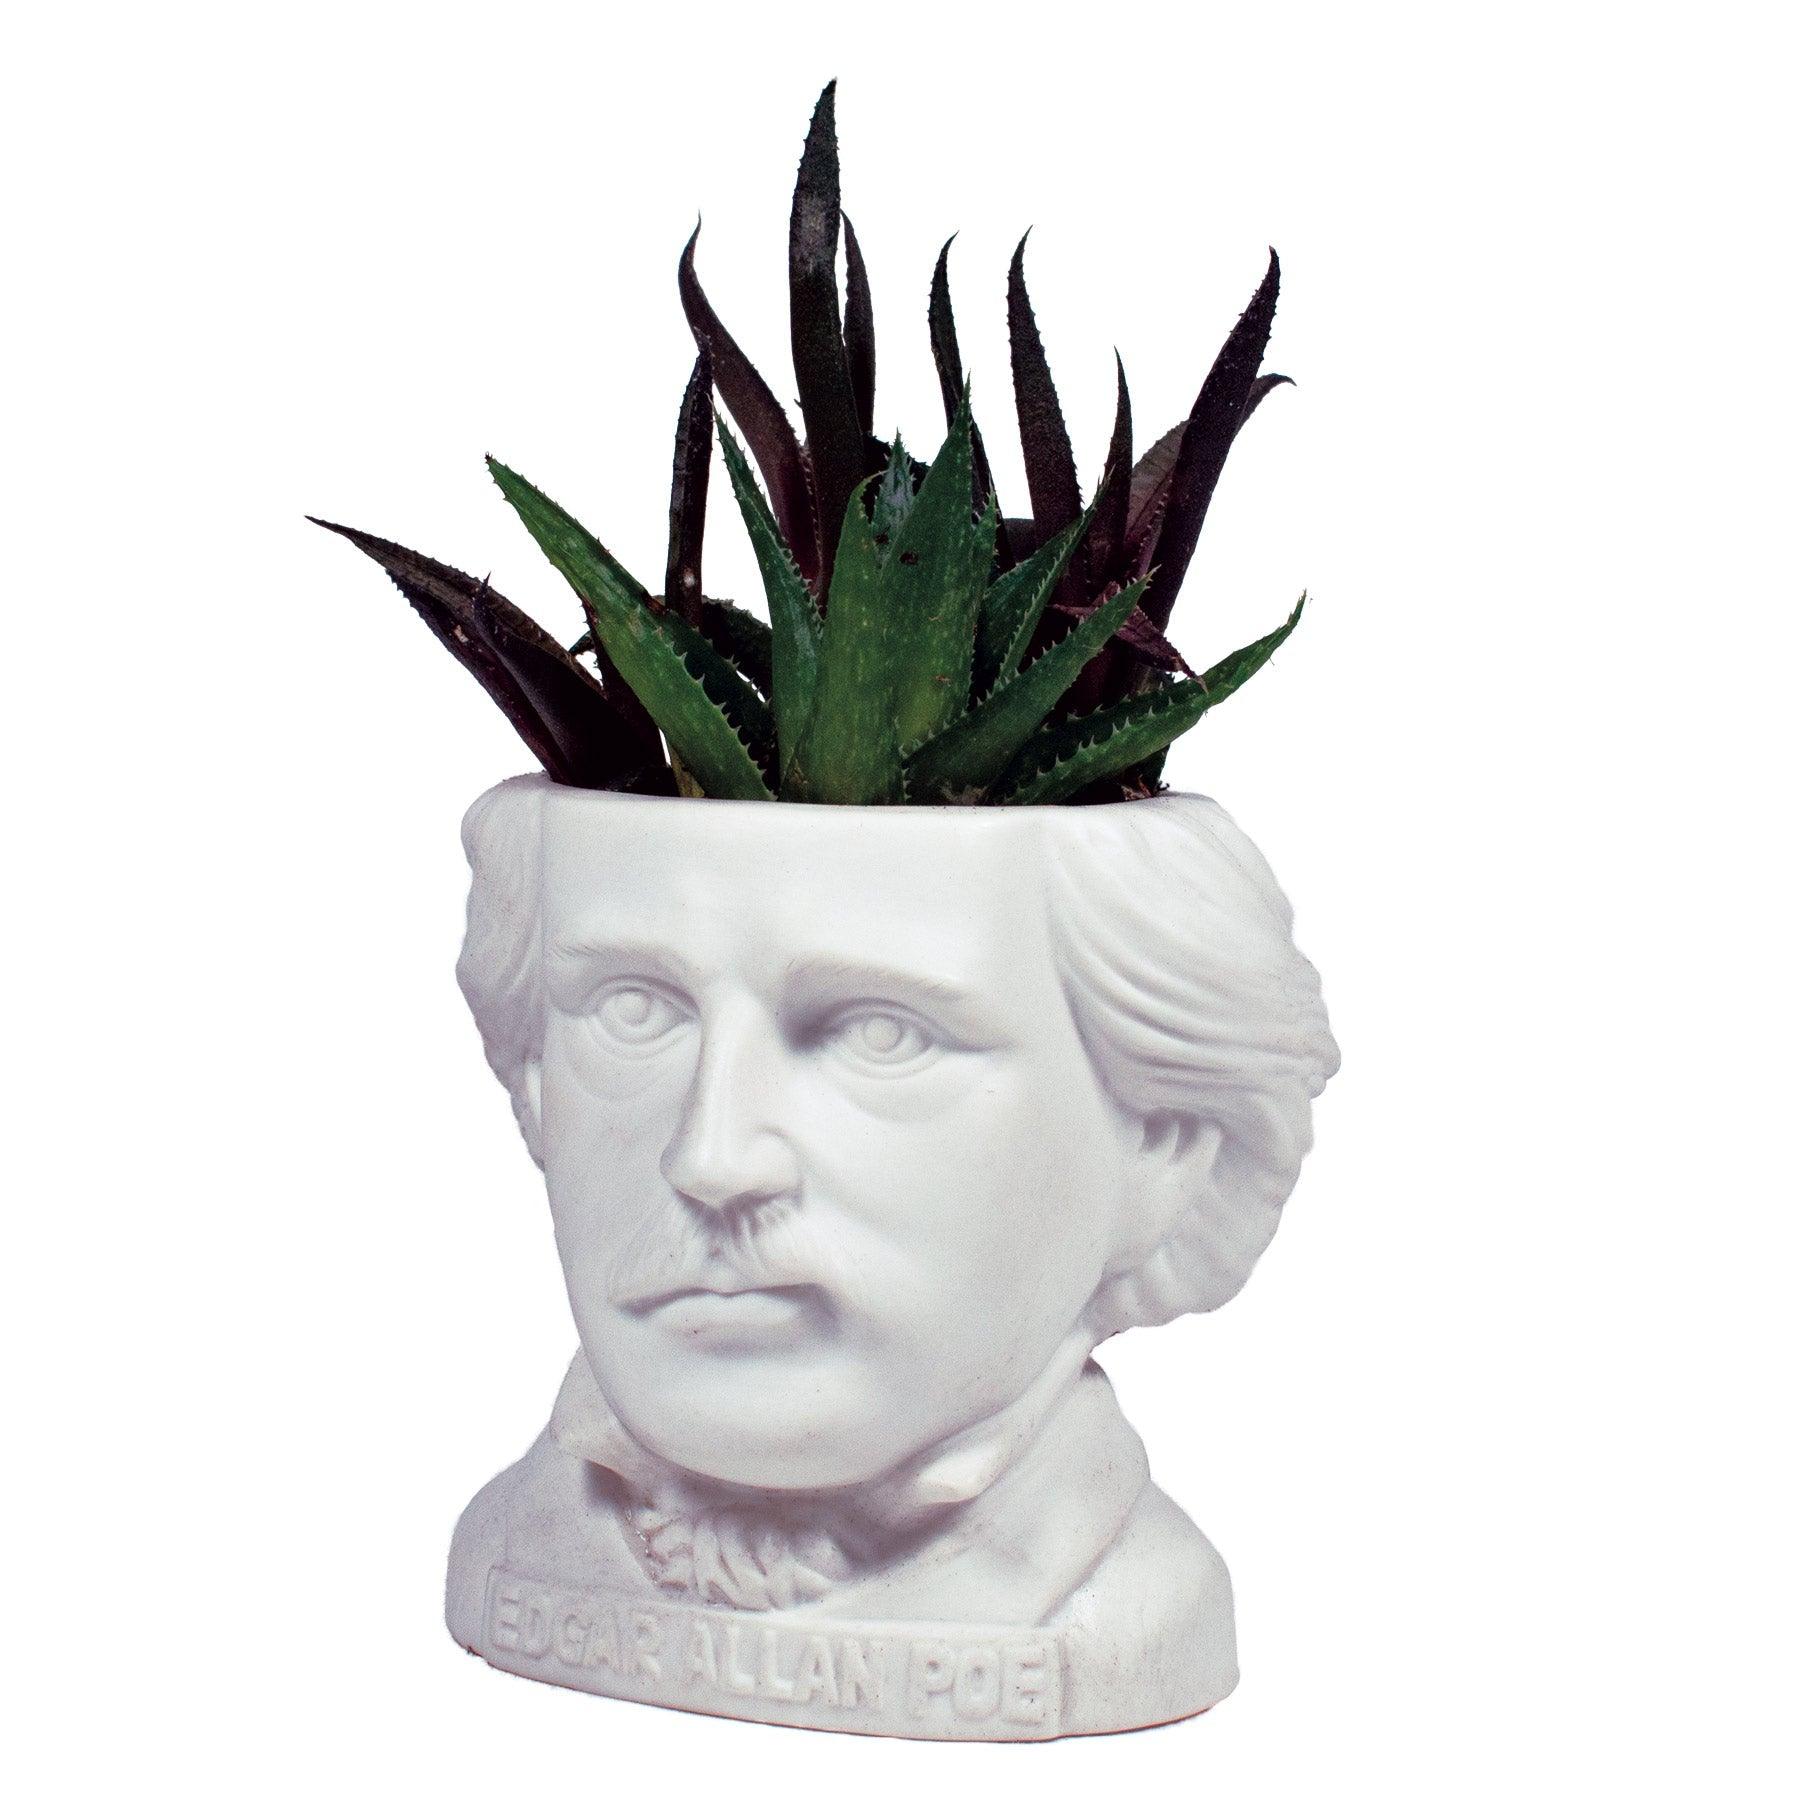 Product photo of Edgar Allan Poe Bust Planter, a novelty gift manufactured by The Unemployed Philosophers Guild.